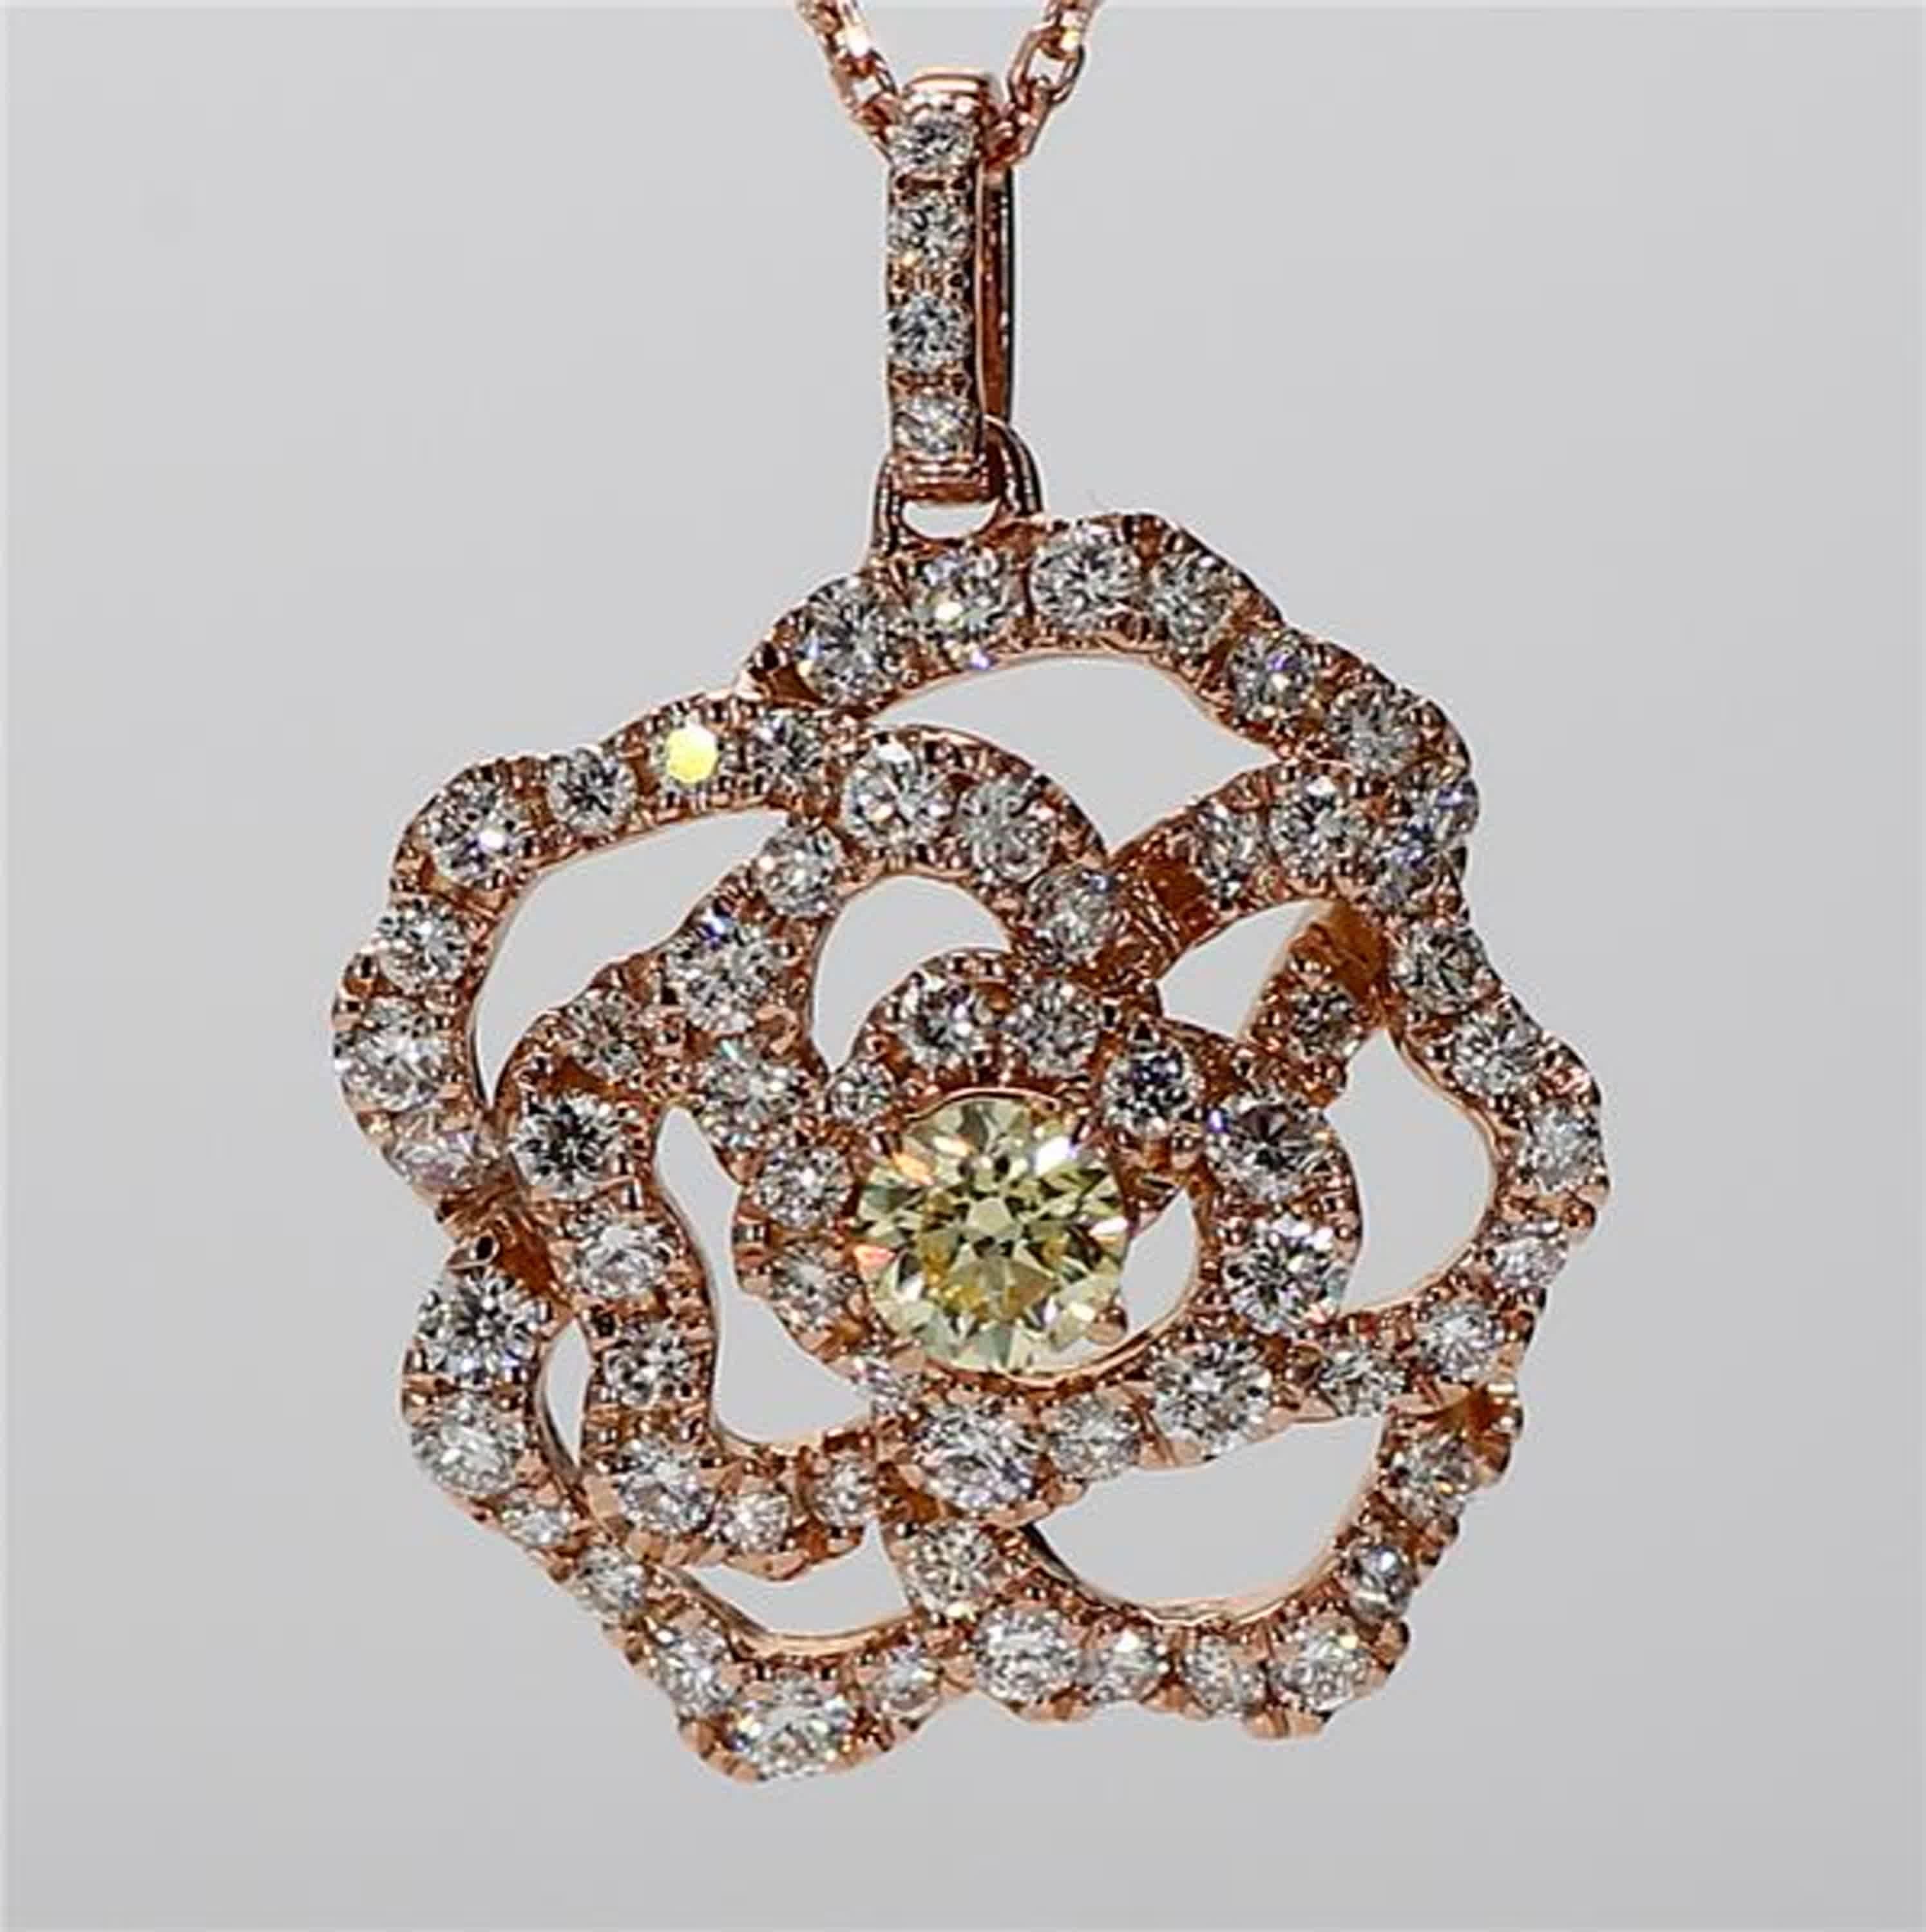 RareGemWorld's classic diamond pendant. Mounted in a beautiful 18K Rose Gold setting with a natural round yellow diamond. The yellow diamond is surrounded by natural round white diamond melee. This pendant is guaranteed to impress and enhance your